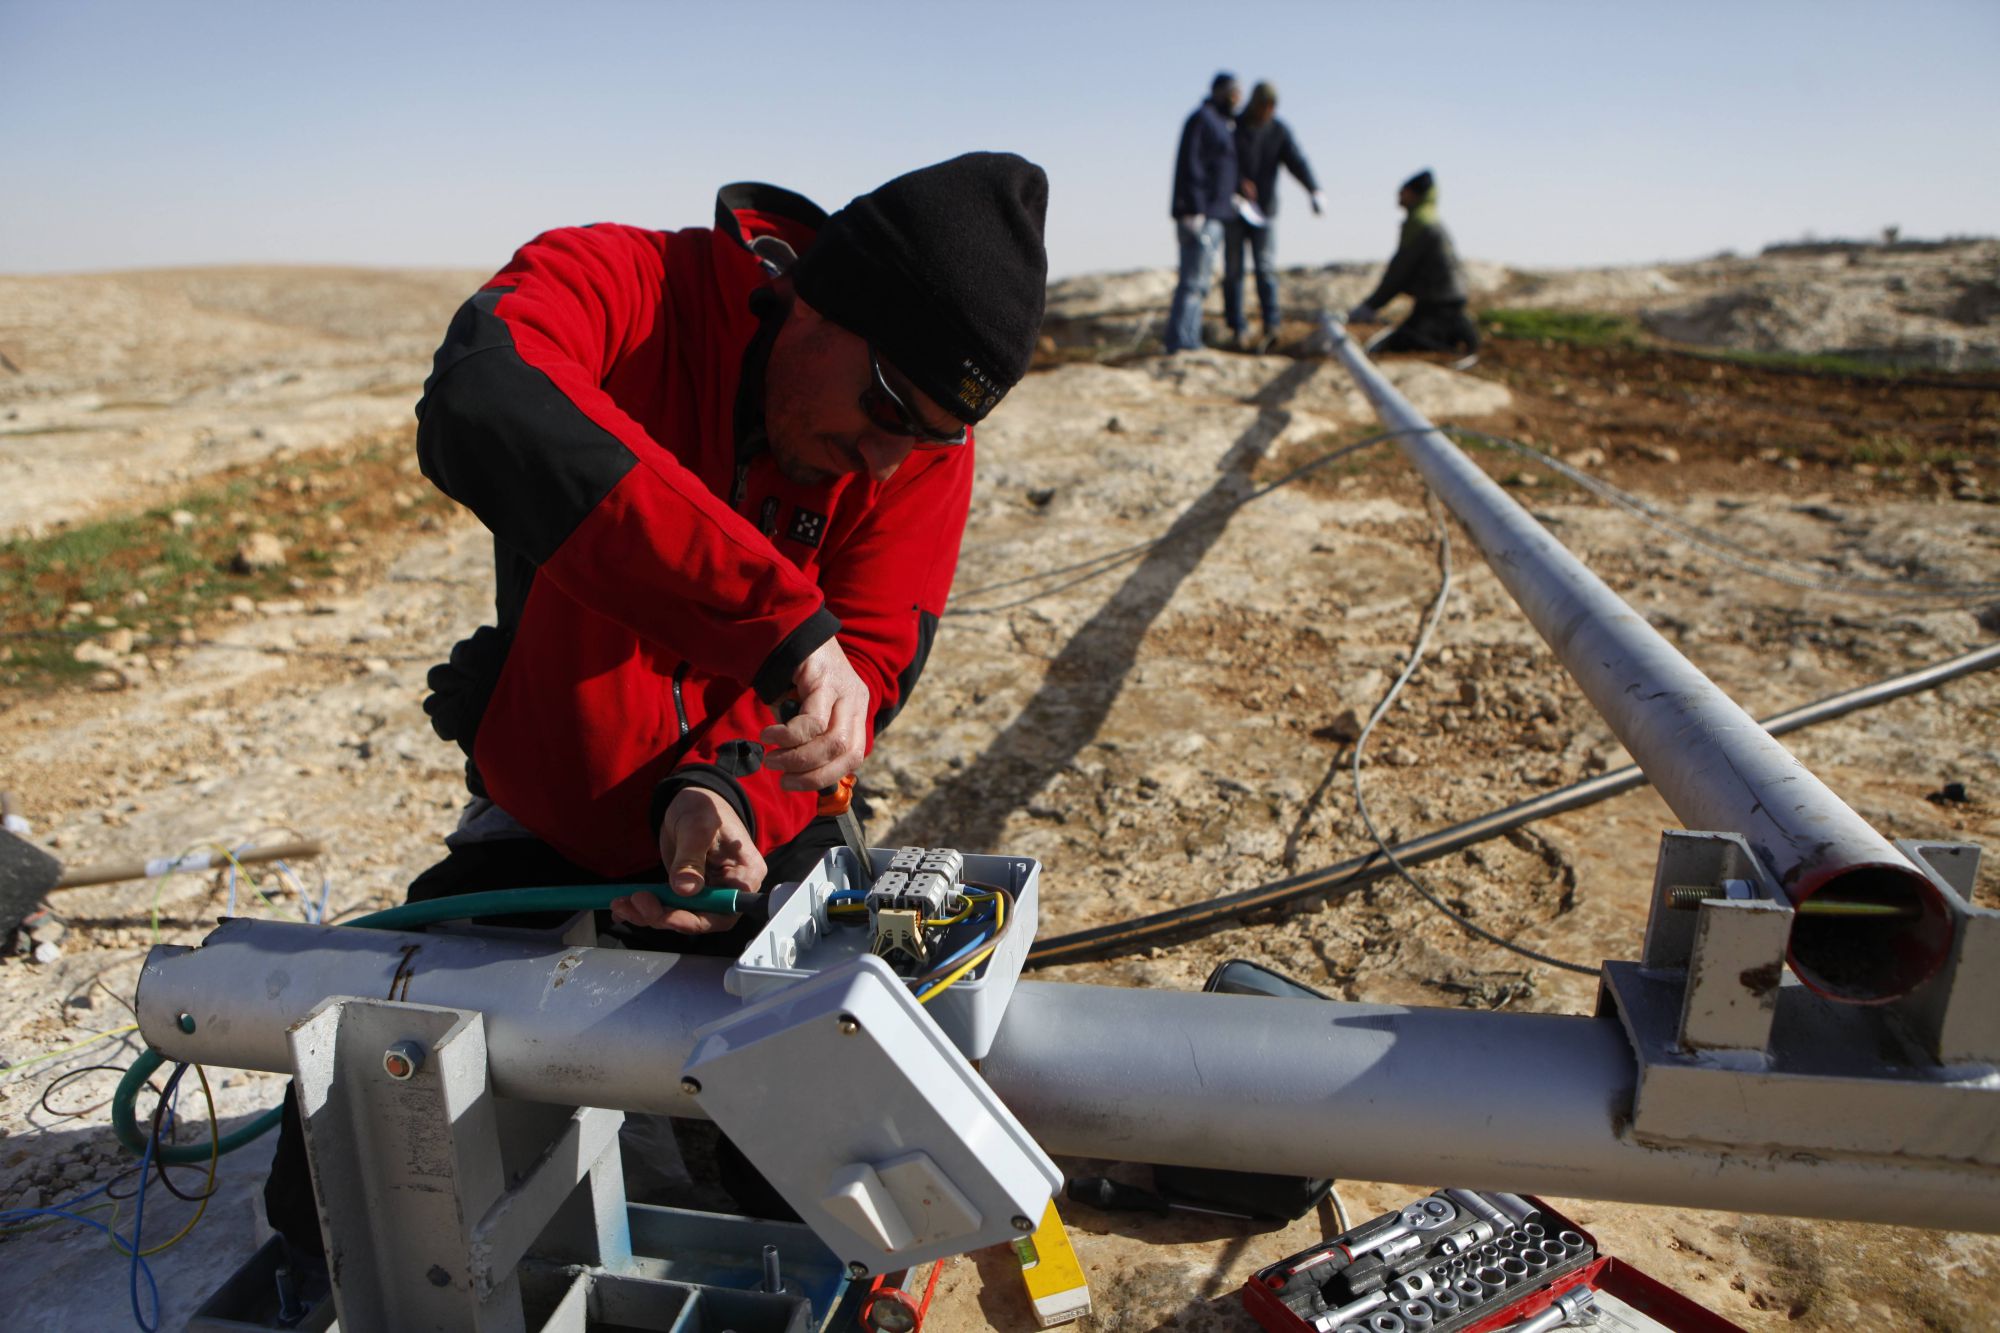 A technician wires up a wind turbine before installation in the South Hebron hills. The villages here are in Area C of the West Bank, which is under Israeli control. Elad Orian, Comet-ME’s cofounder, says Israel does not provide Palestinians with basic services “as part of a political campaign to try and drive them off their land”
